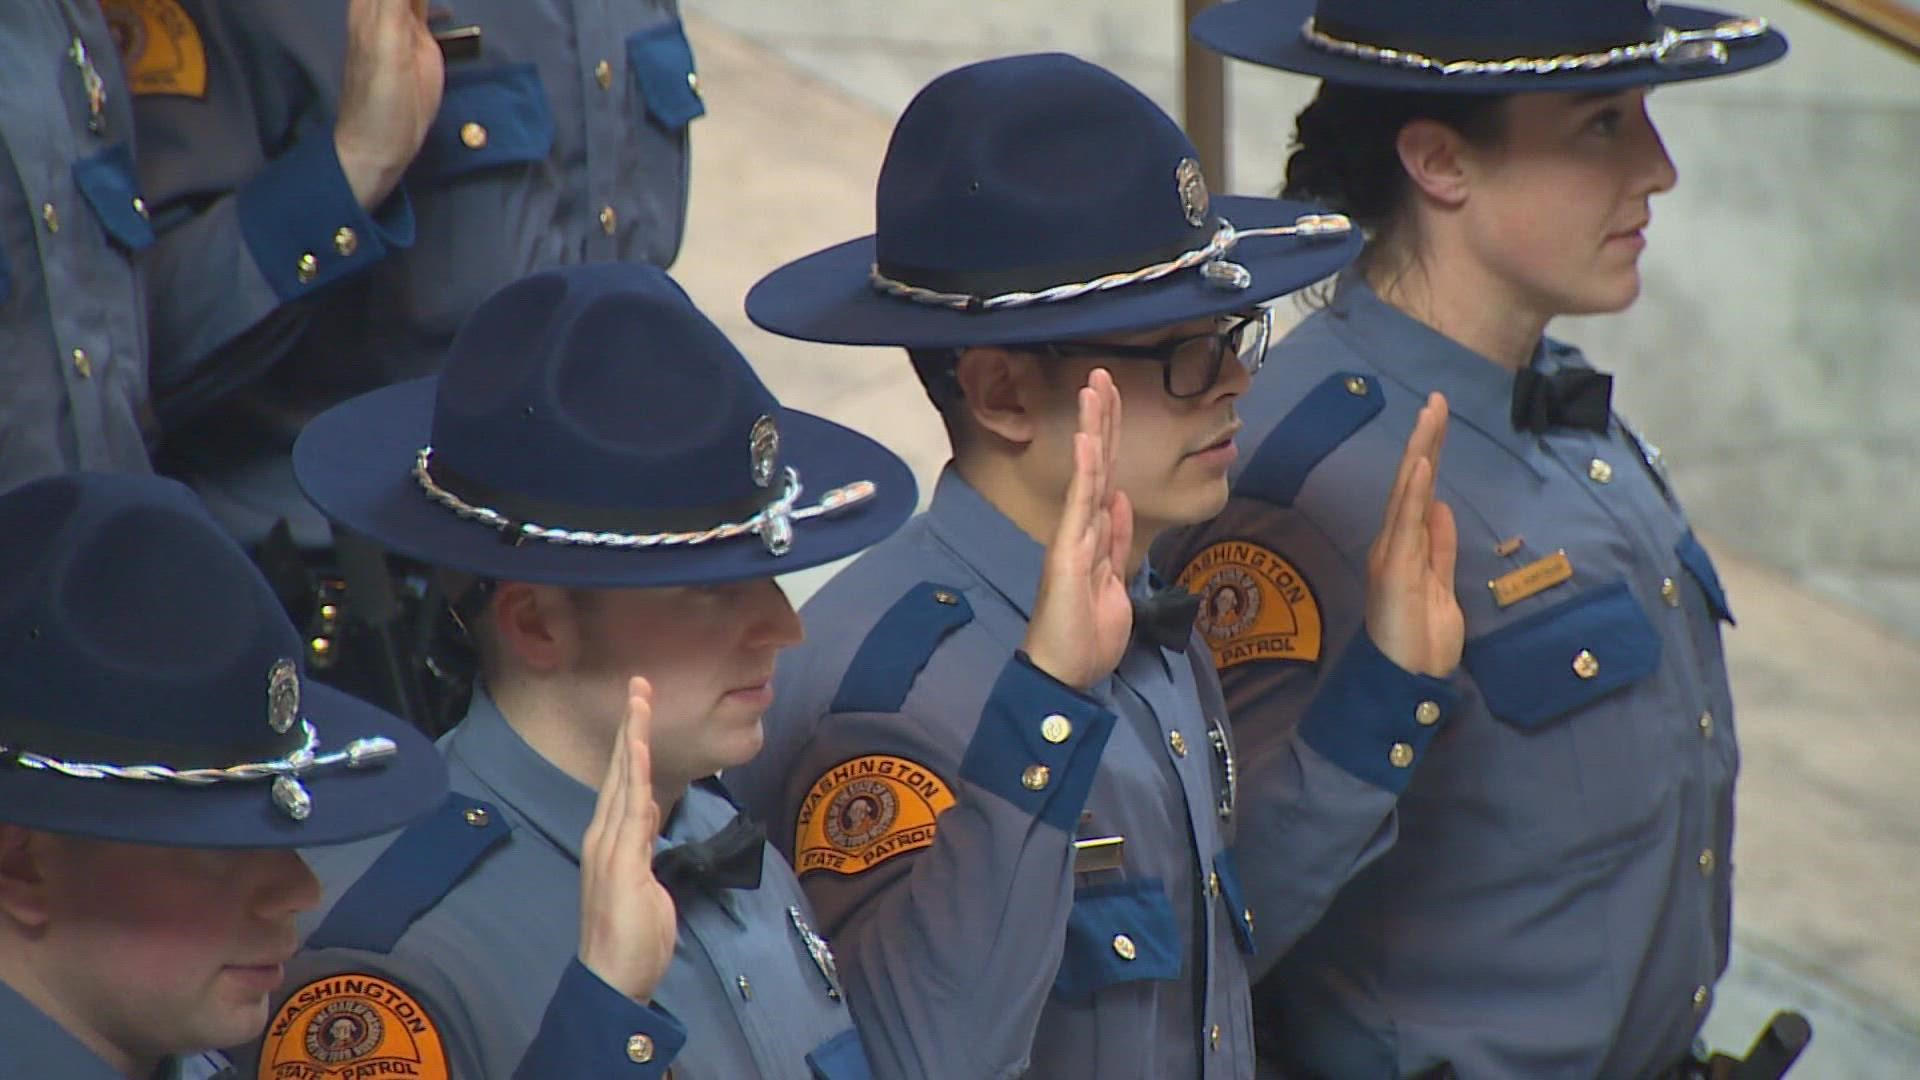 Over 80 percent of Washington State Patrol troopers are white, and 90 percent are male.